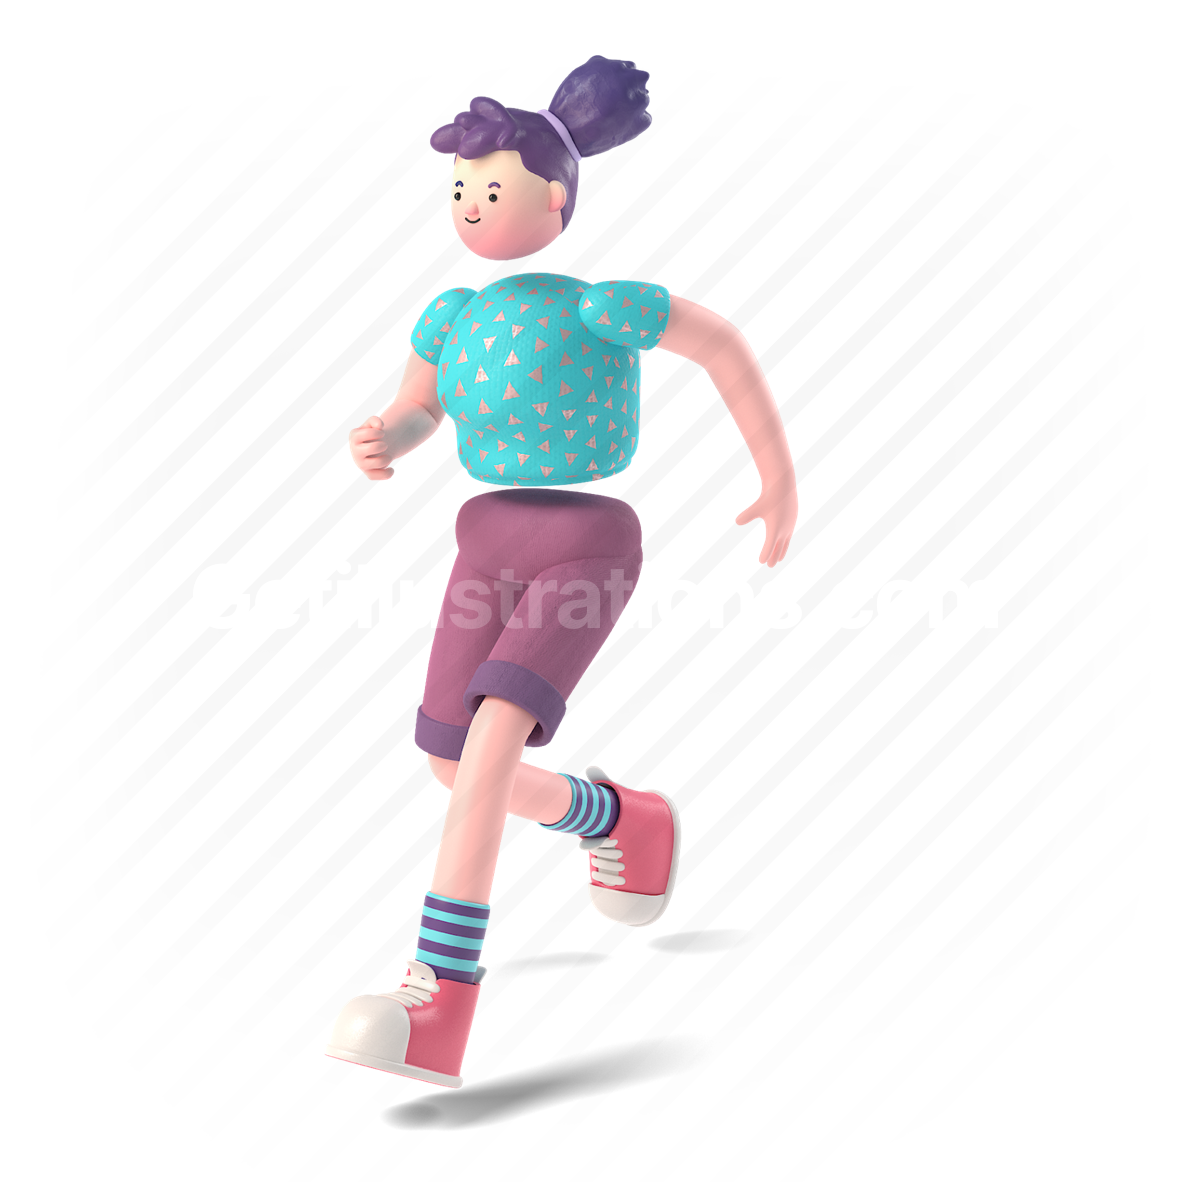 3d, people, person, character, pixie, girl, woman, run, running, hurry